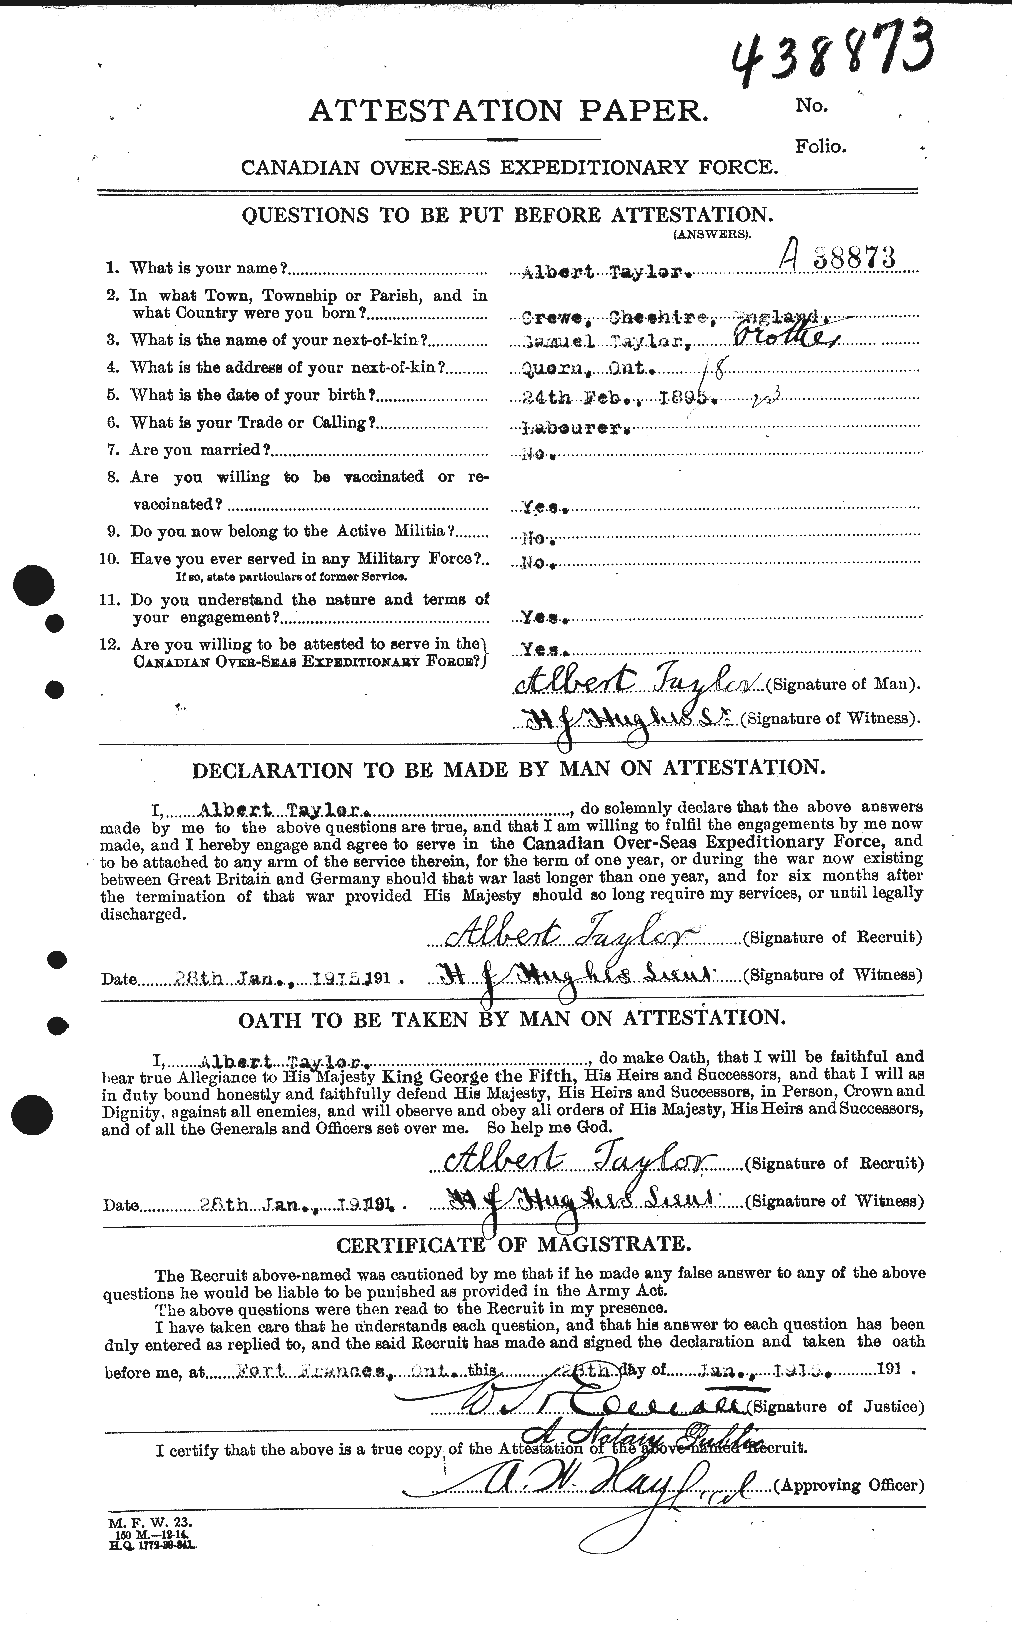 Personnel Records of the First World War - CEF 626091a